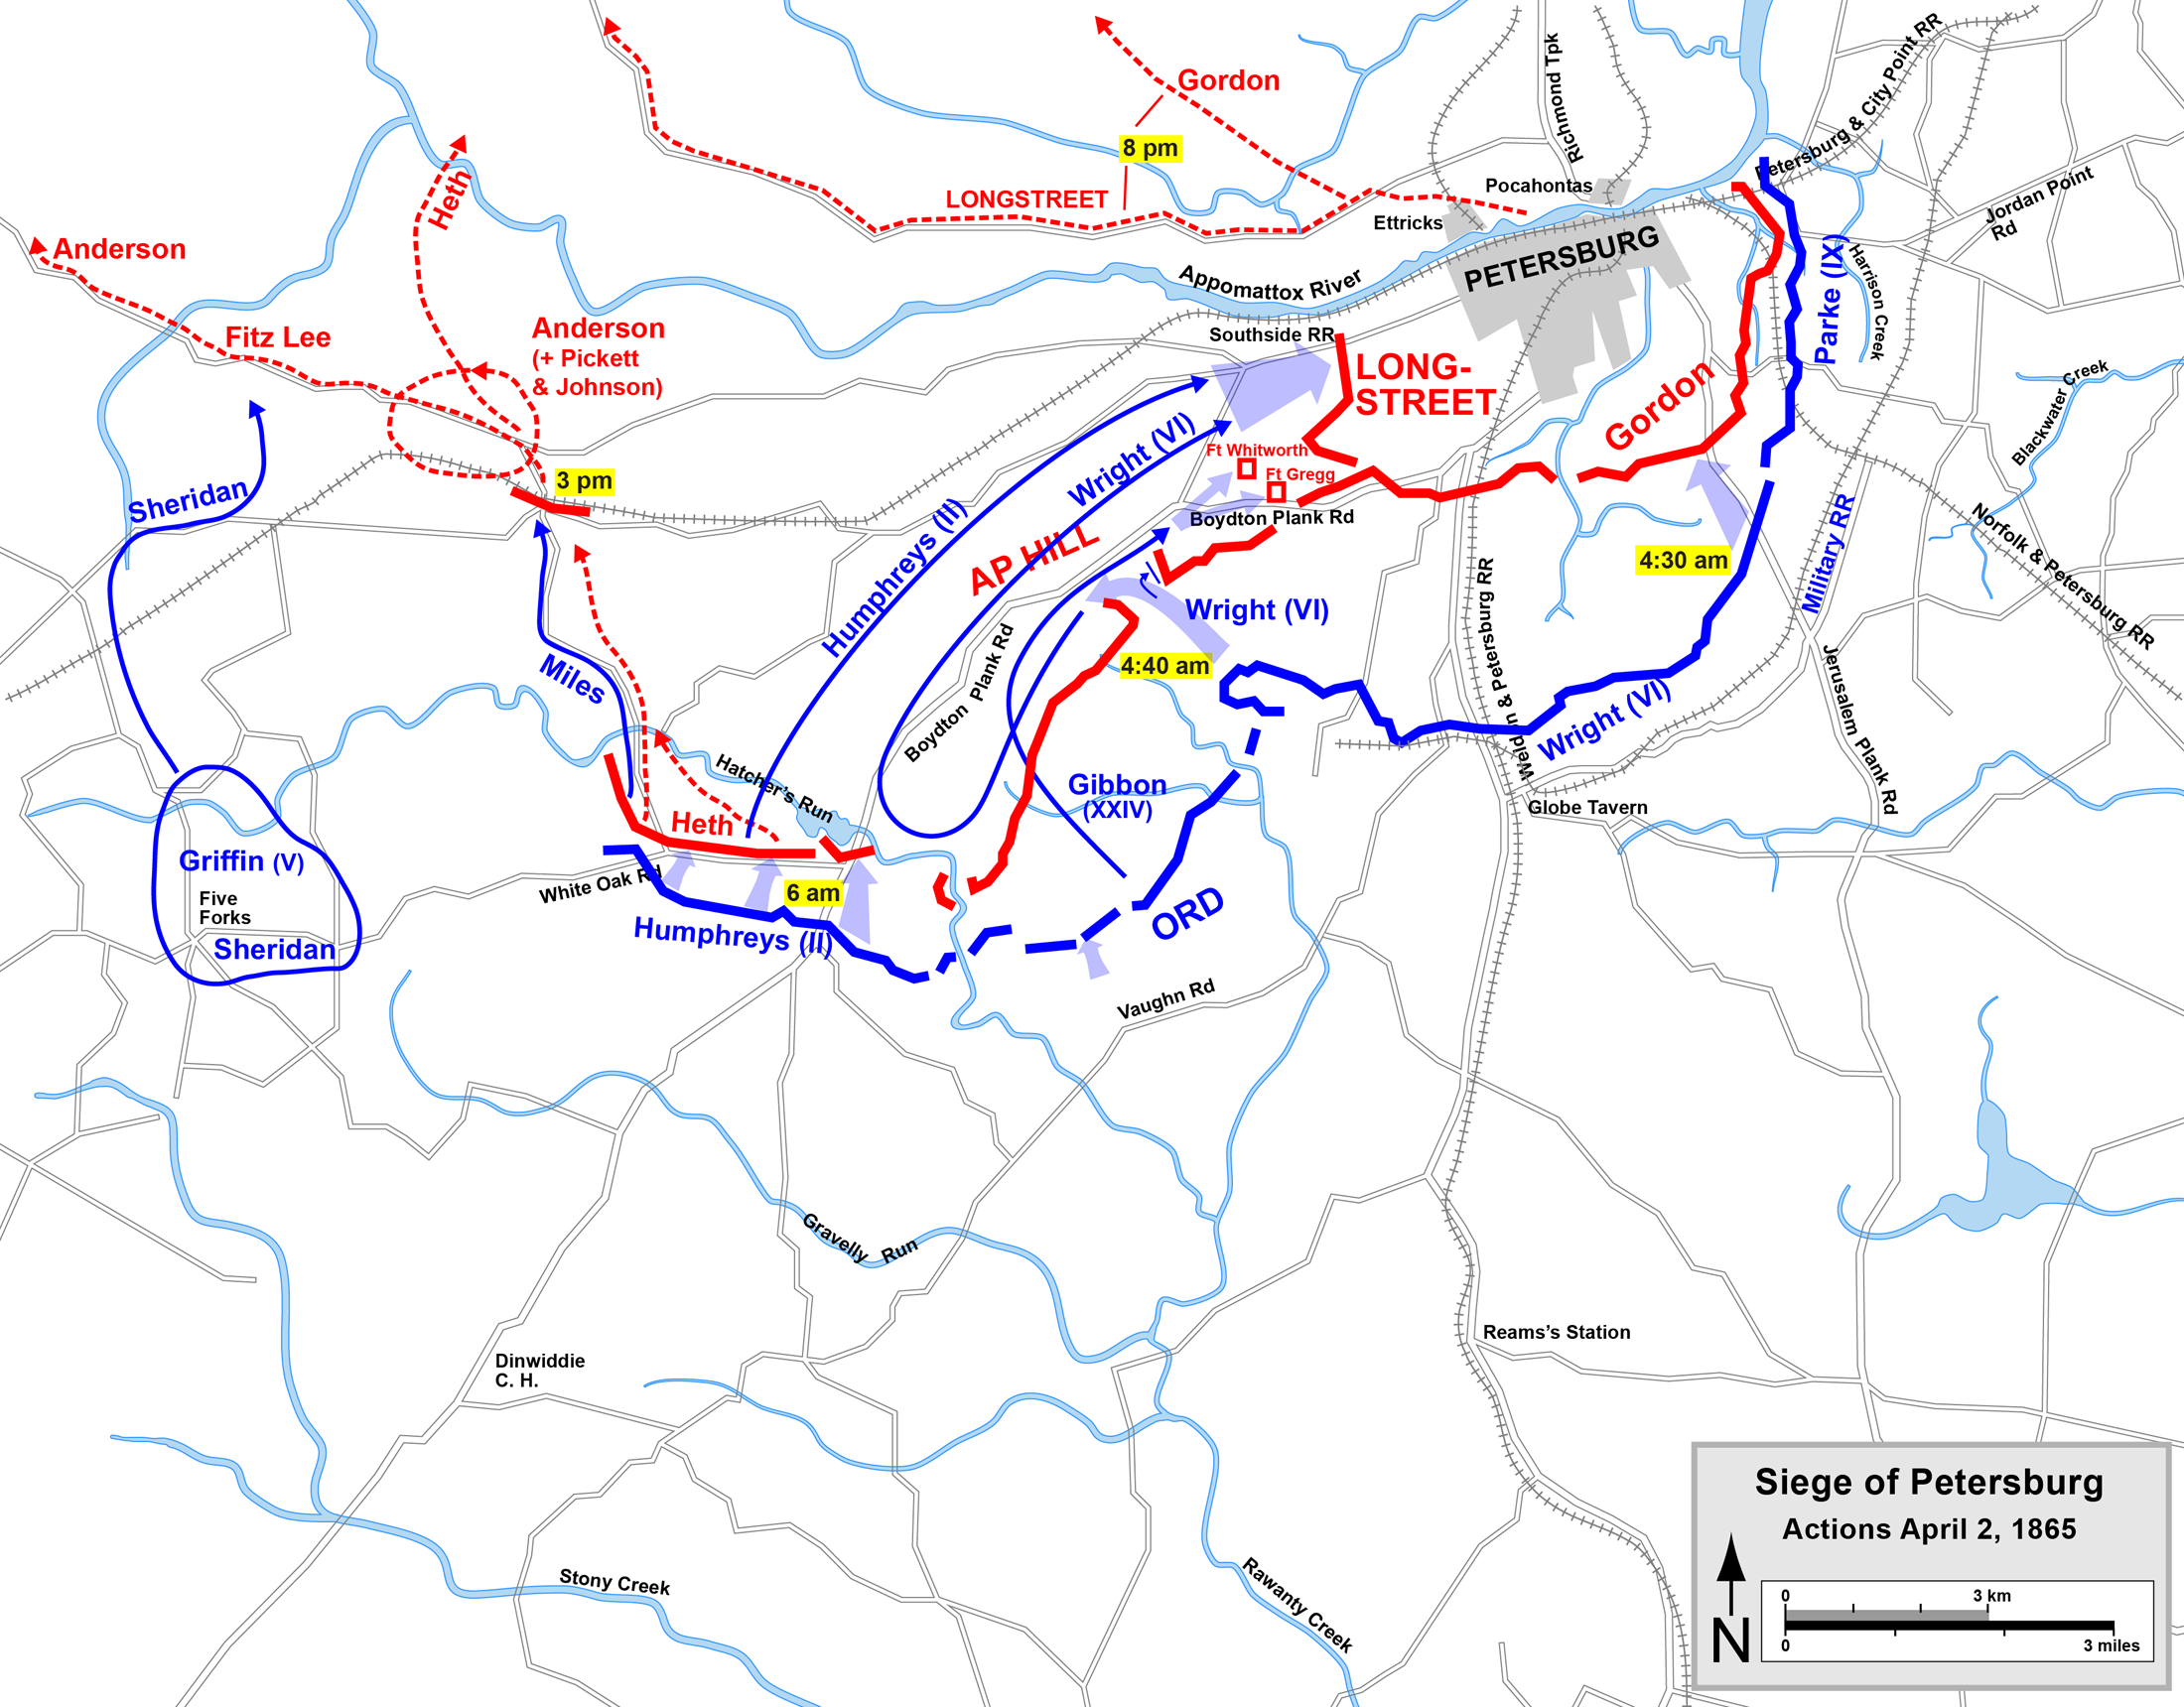 Grant's April 2, 1865, assault on the Petersburg line and the start of Lee's retreat.